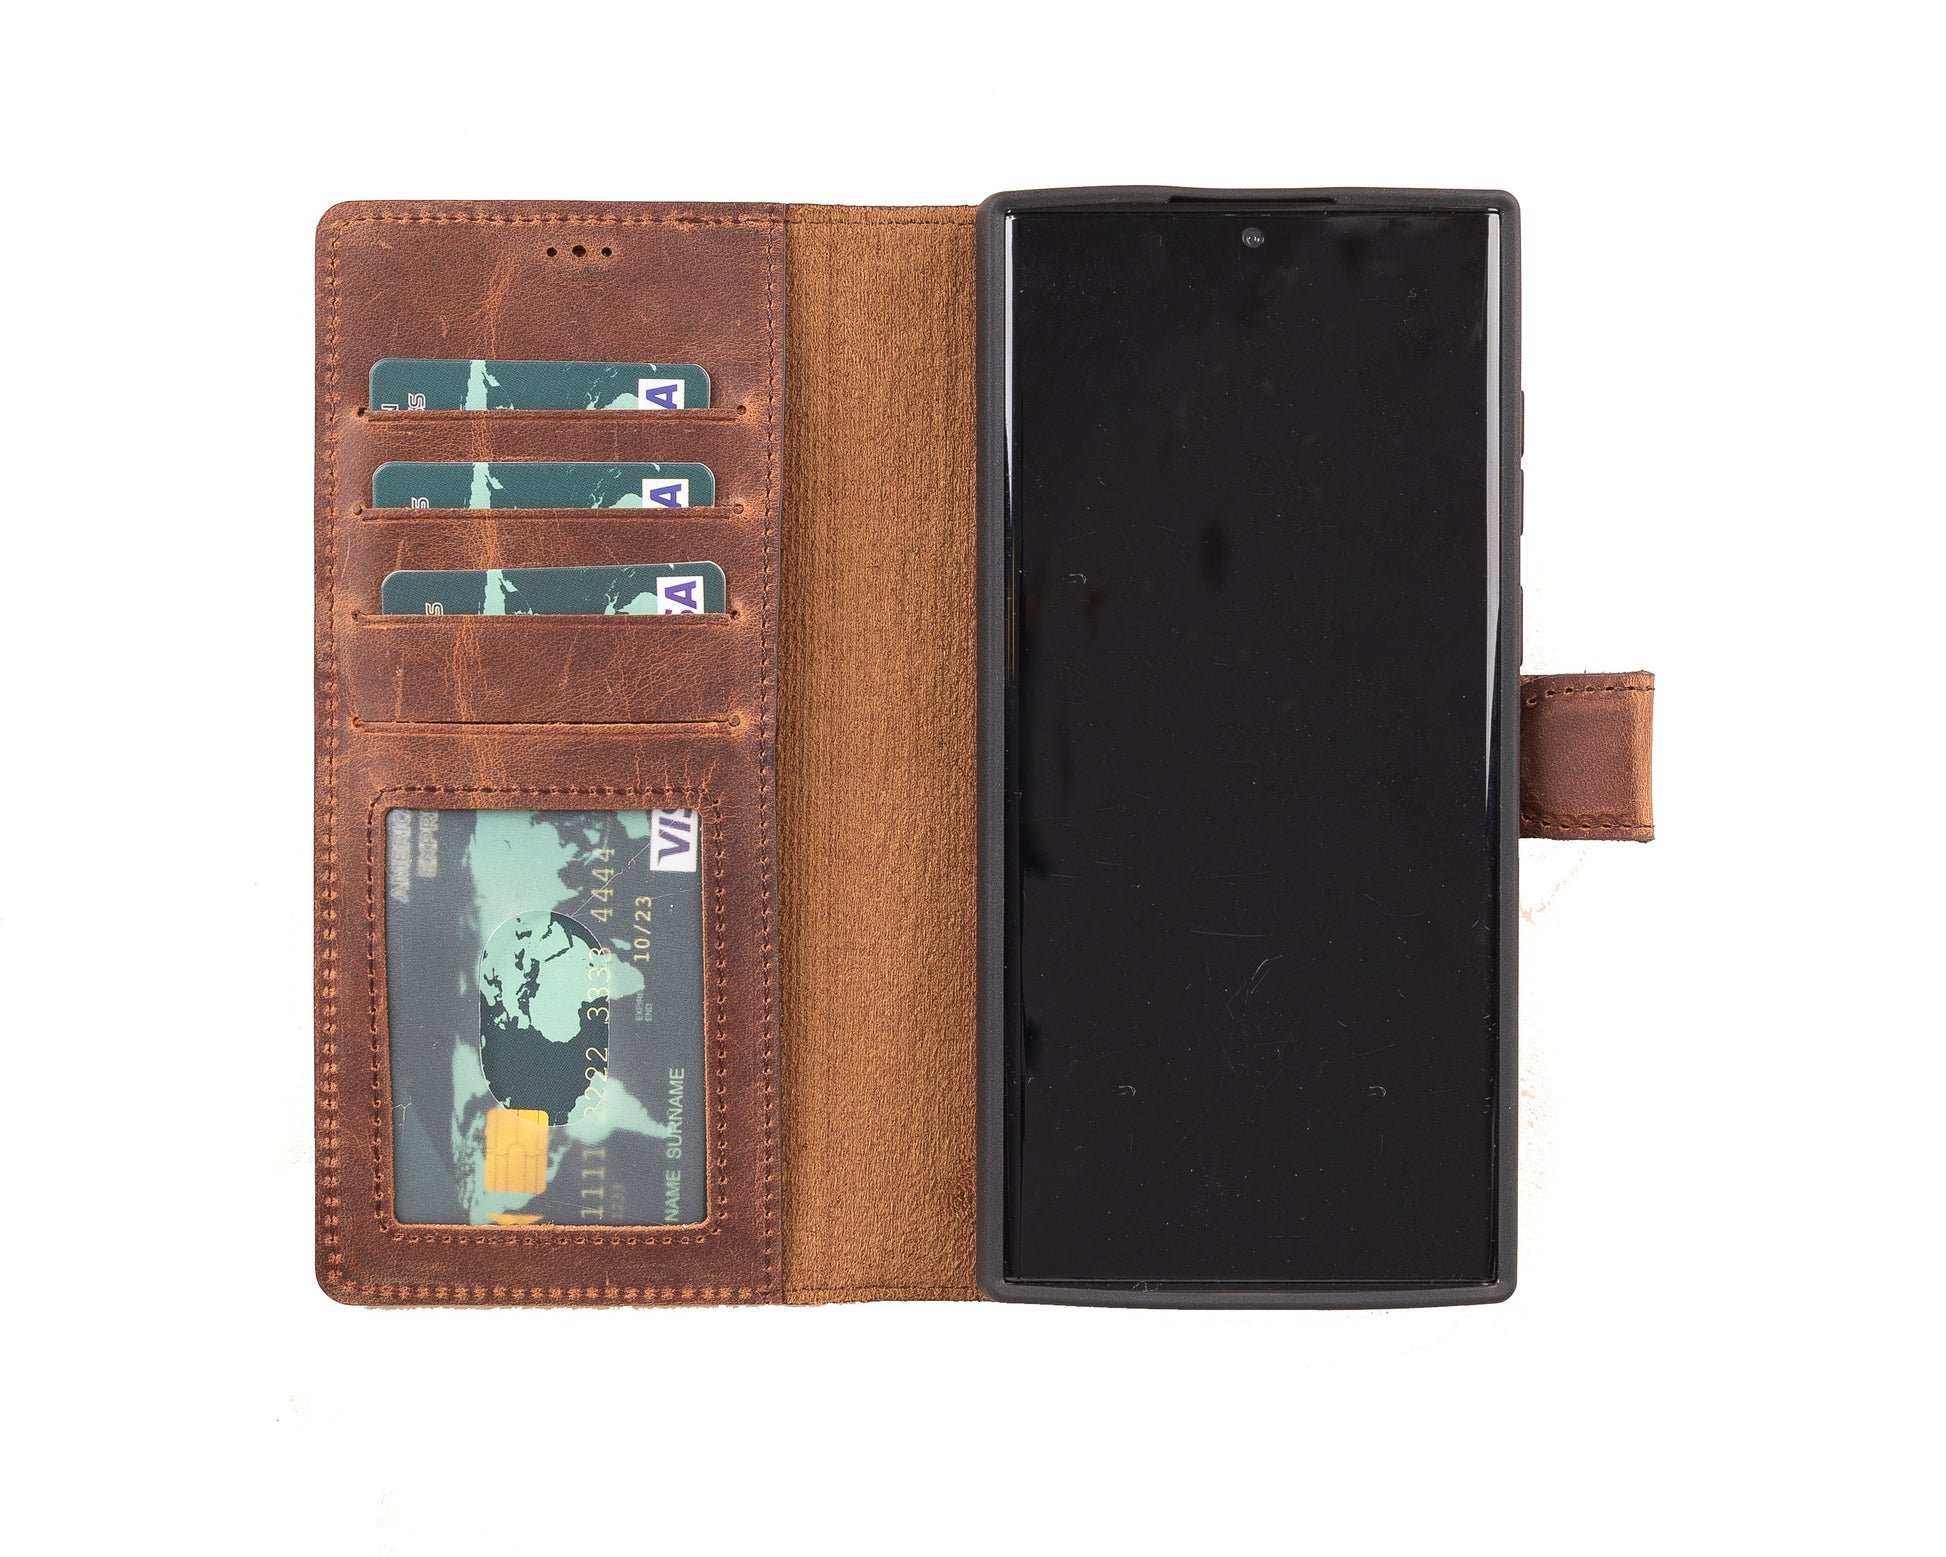 Samsung S22 Ultra Magnetic Leather Wallet Case - Magnetic Wallet